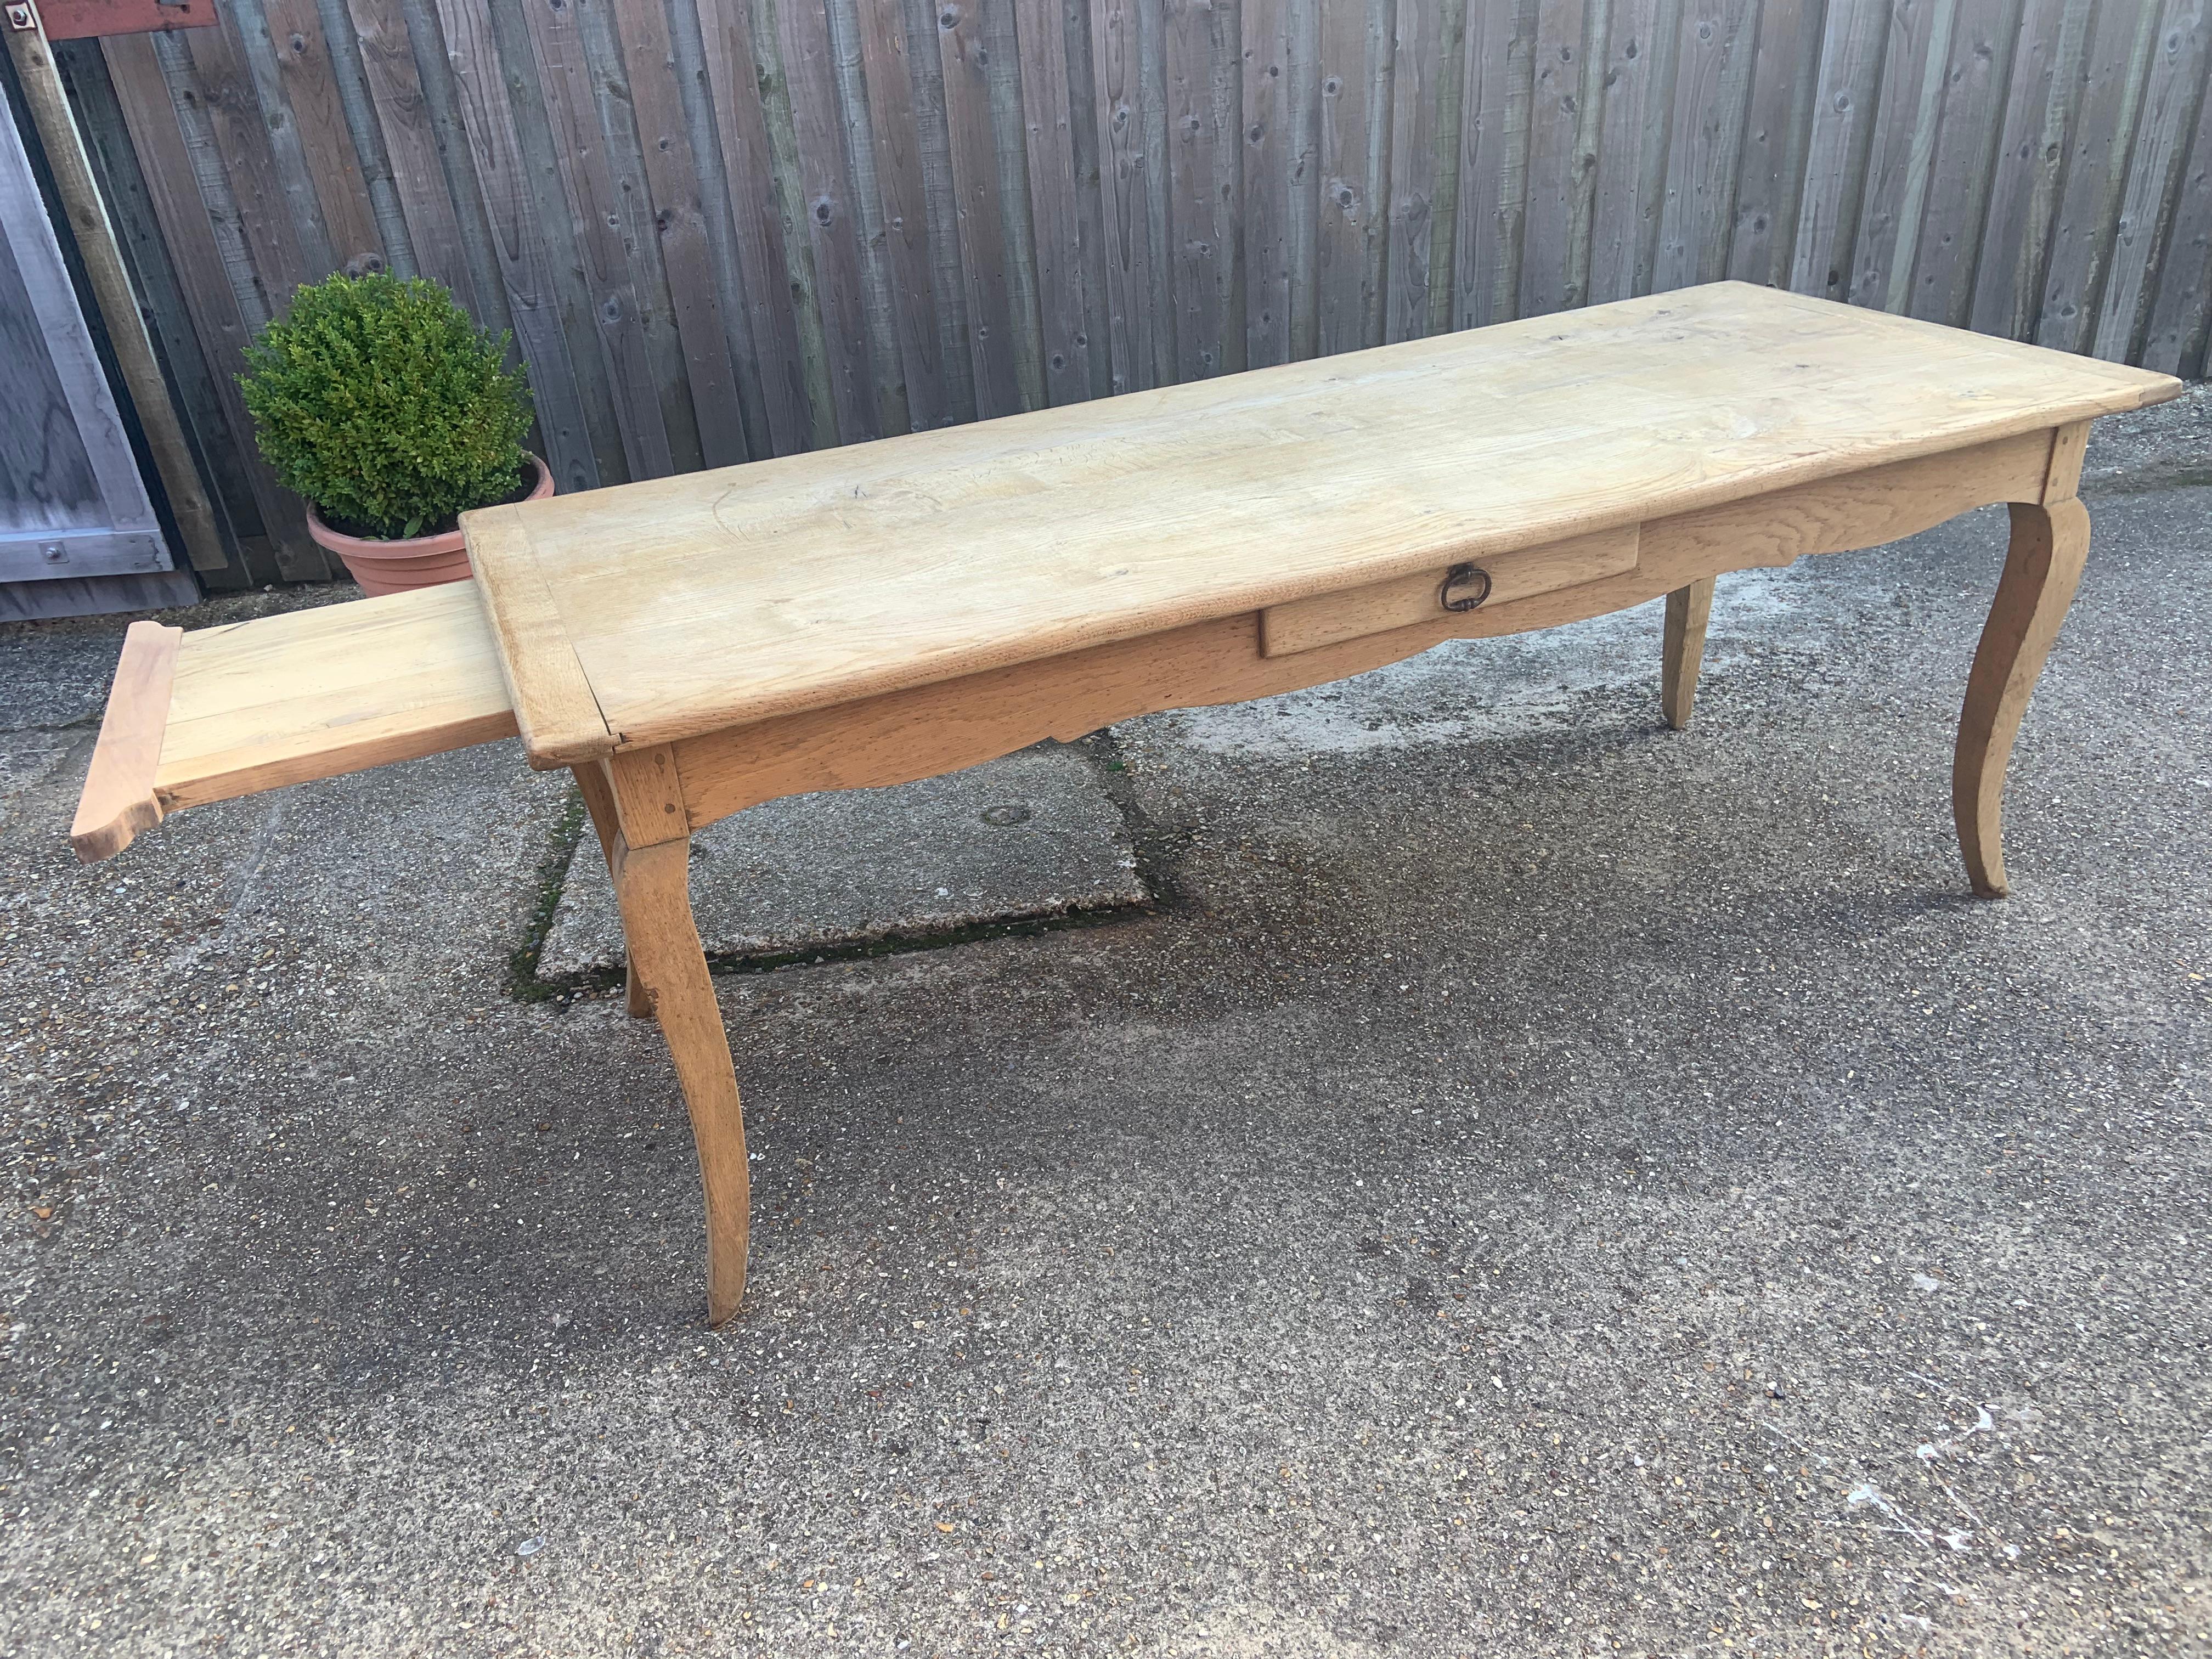 Pale Oak Cabriole leg Farmhouse table with one side drawer and bread slide. This table has beautiful cabriole legs. The table has been bleached to give it a very pale colour in oak. Very sturdy and well constructed.

 